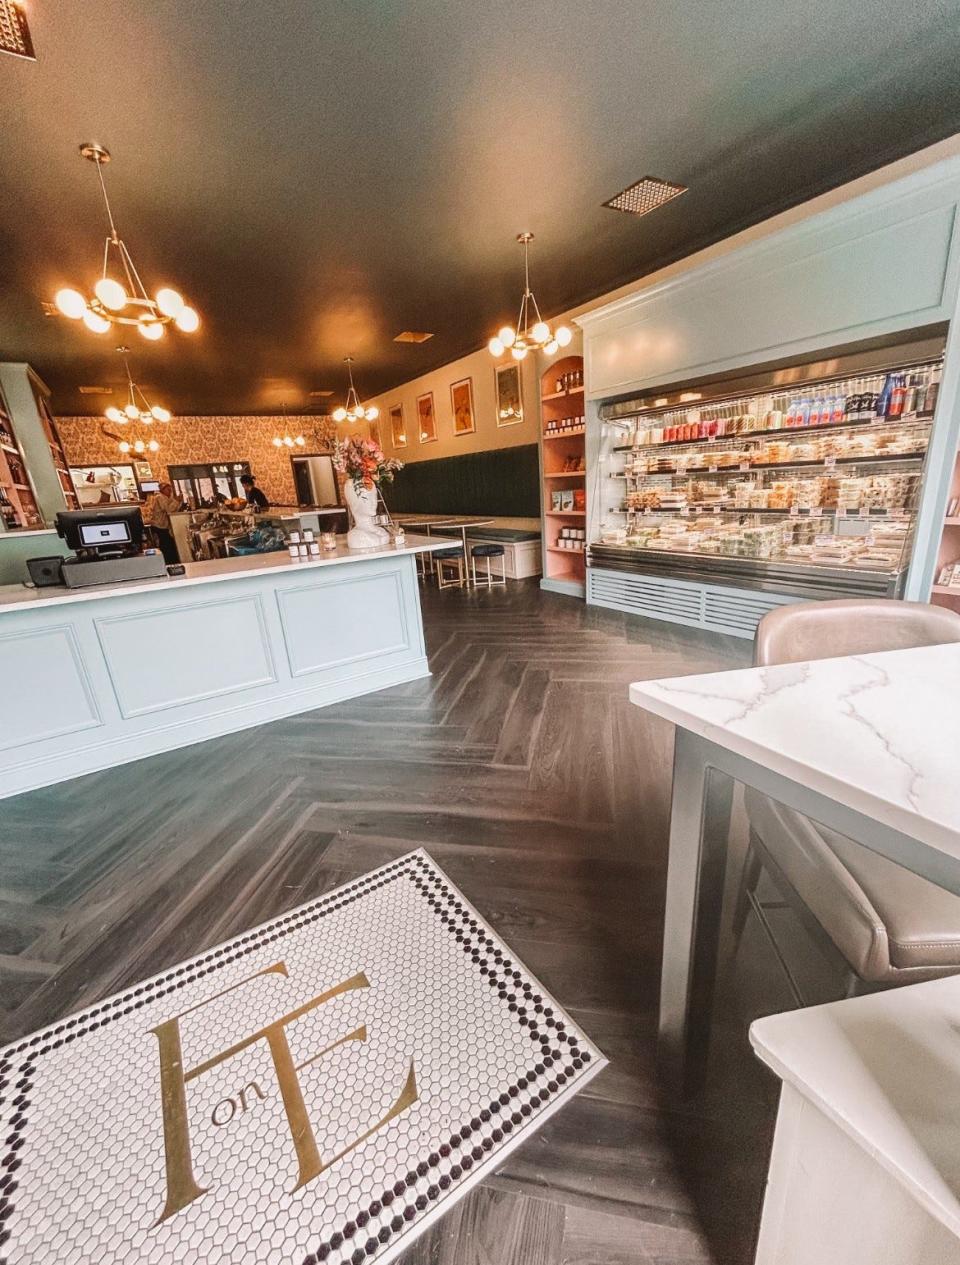 A major focus of the owners was to create and ambiance with the interior of Fare on Eighth. "We want people to have an experience and for this to become a destination for people," April Sellers said.